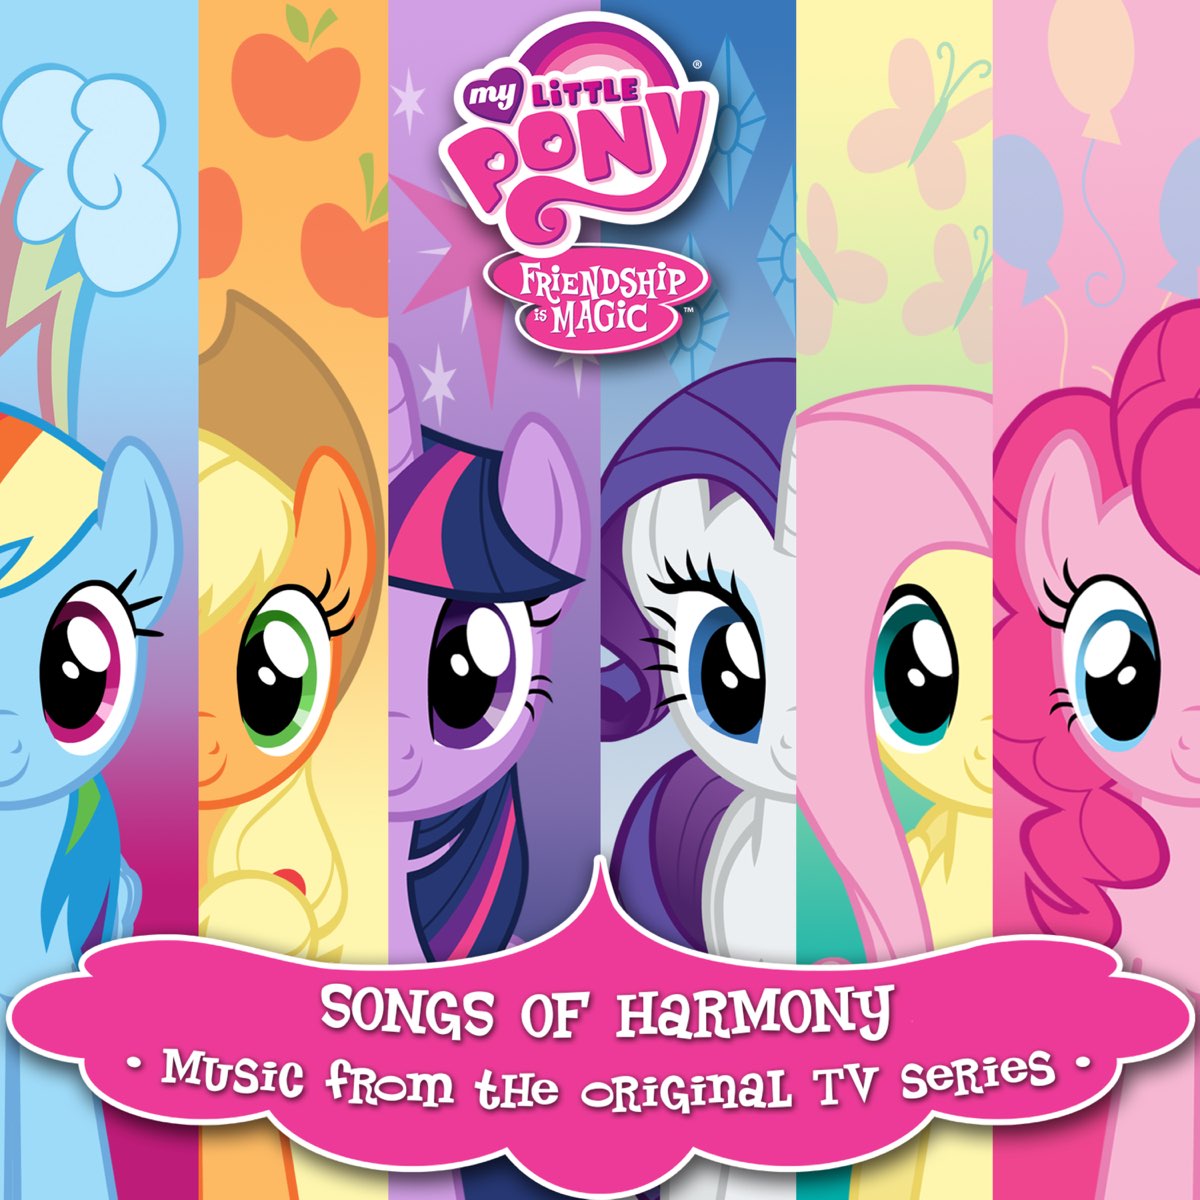 ‎Friendship is Magic: Songs of Harmony by My Little Pony on Apple Music